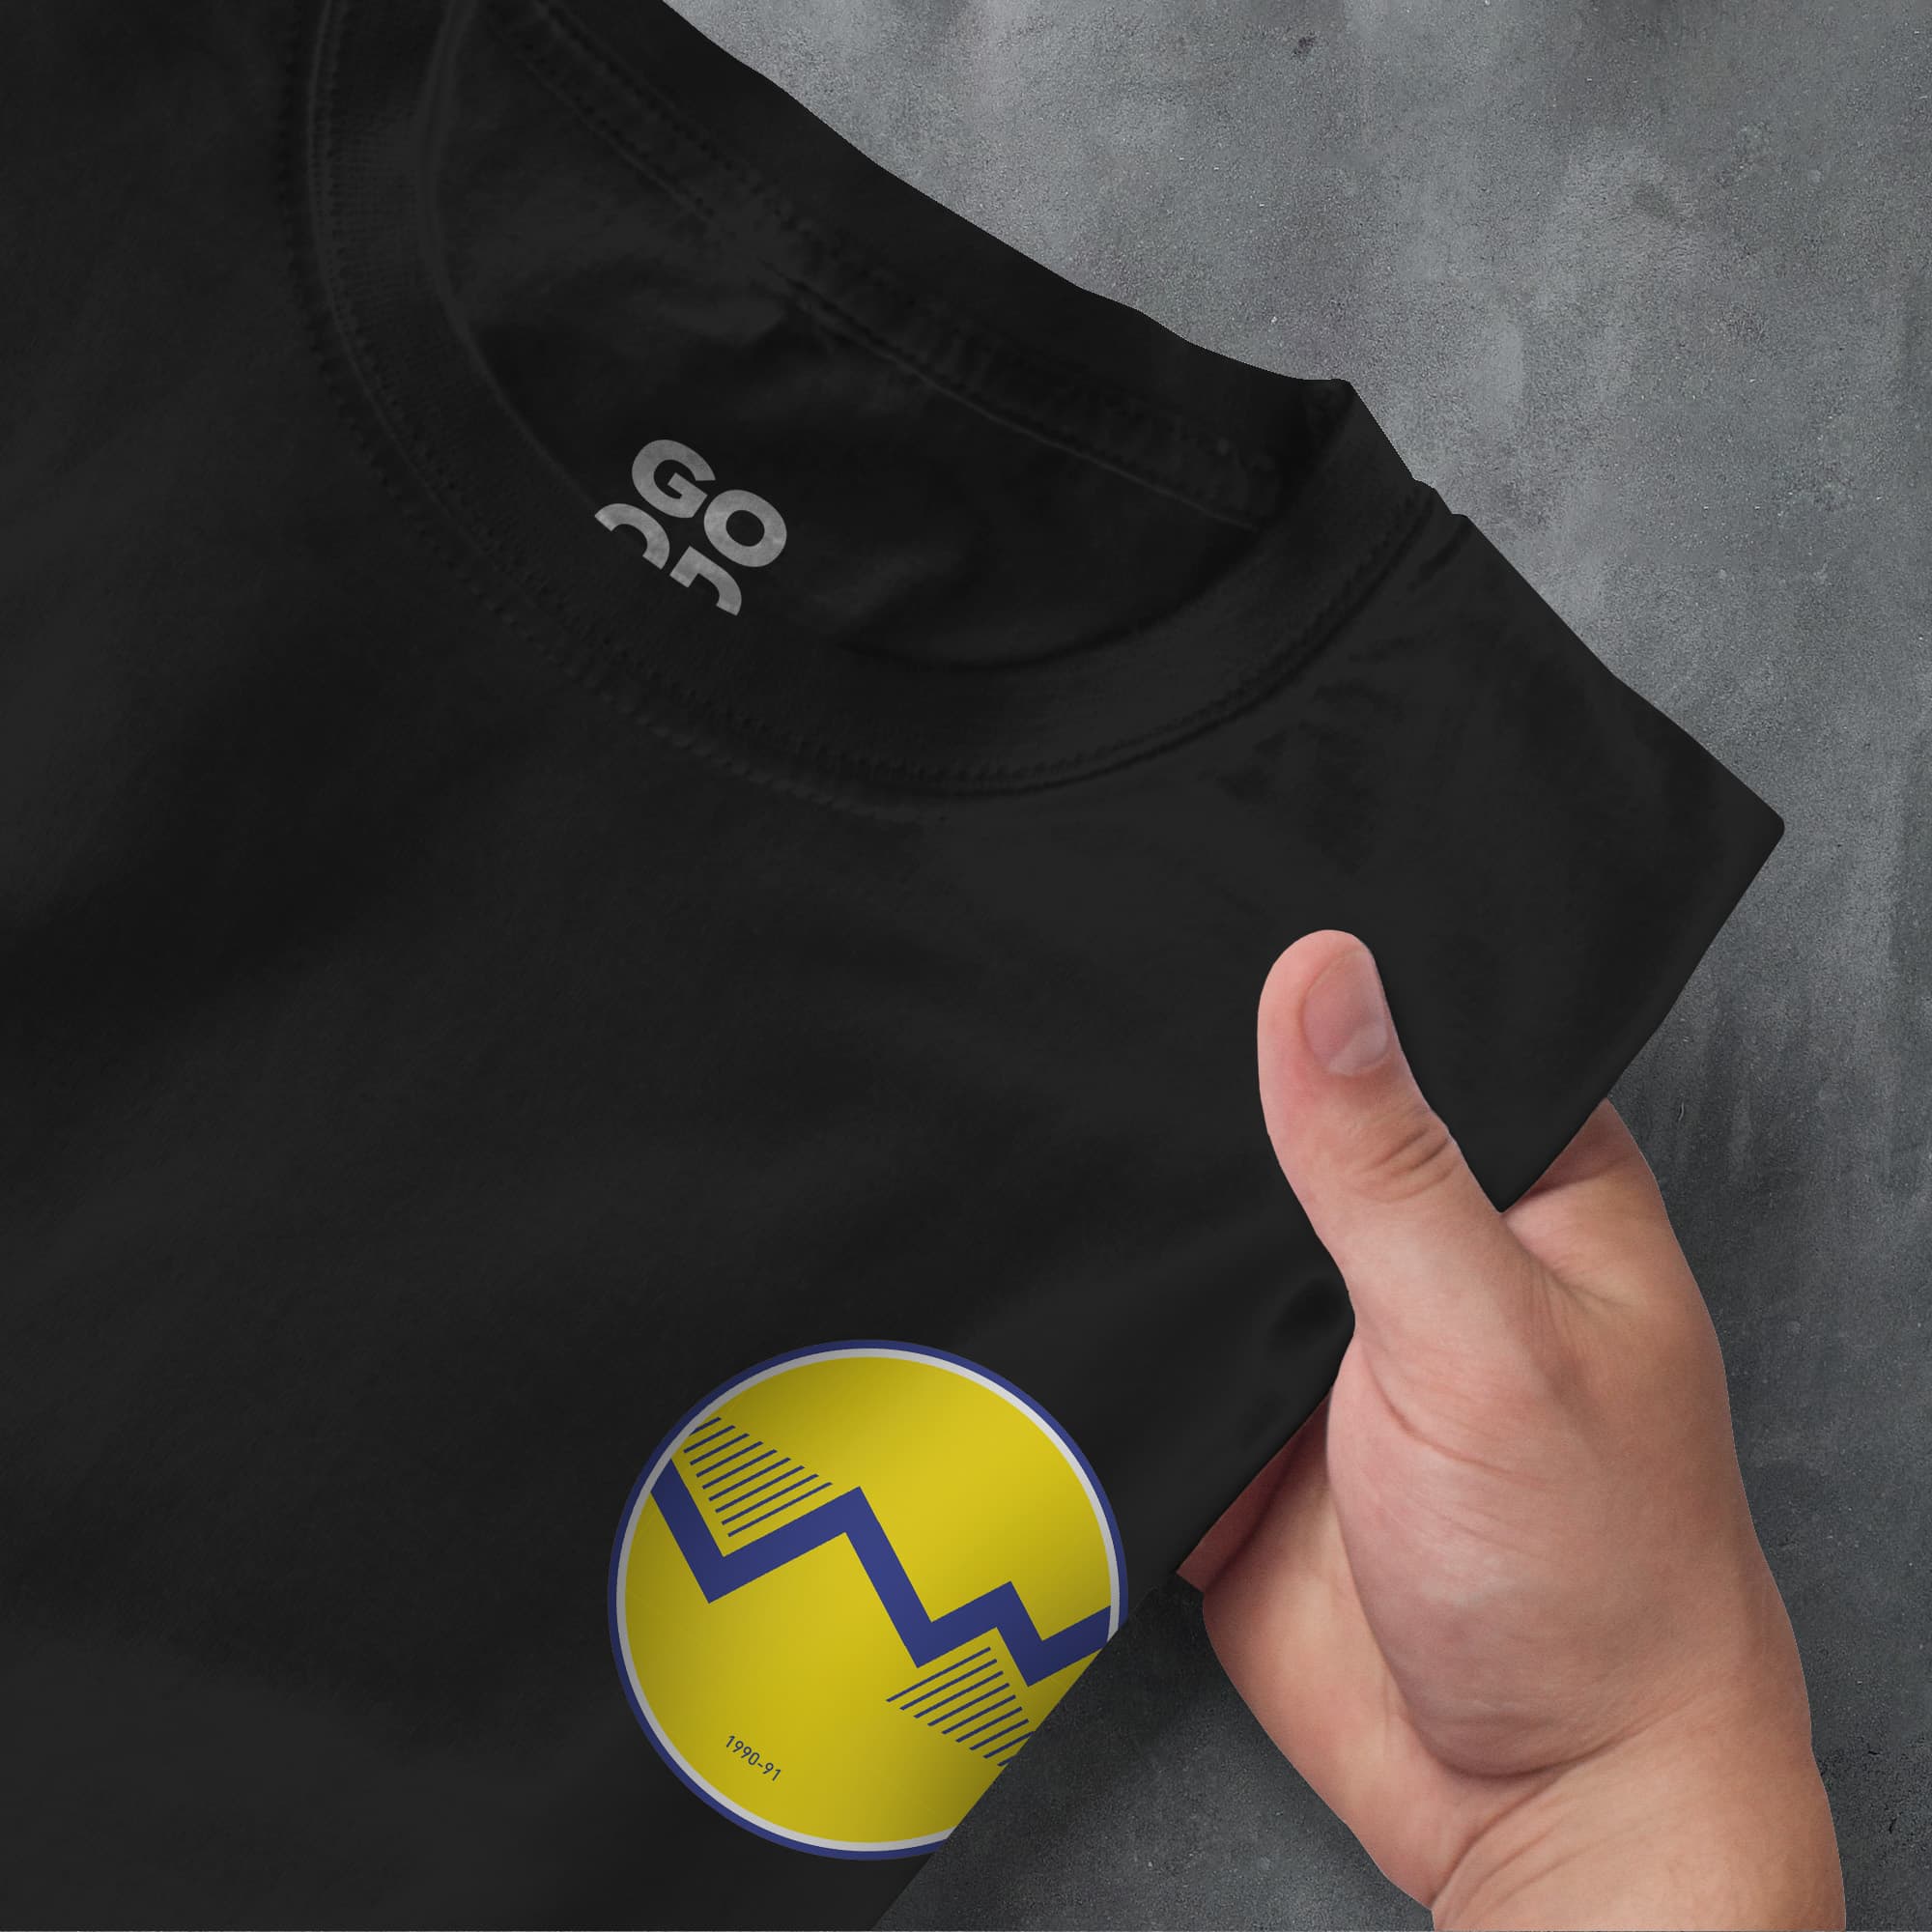 a person pointing at a black shirt with a yellow and blue design on it